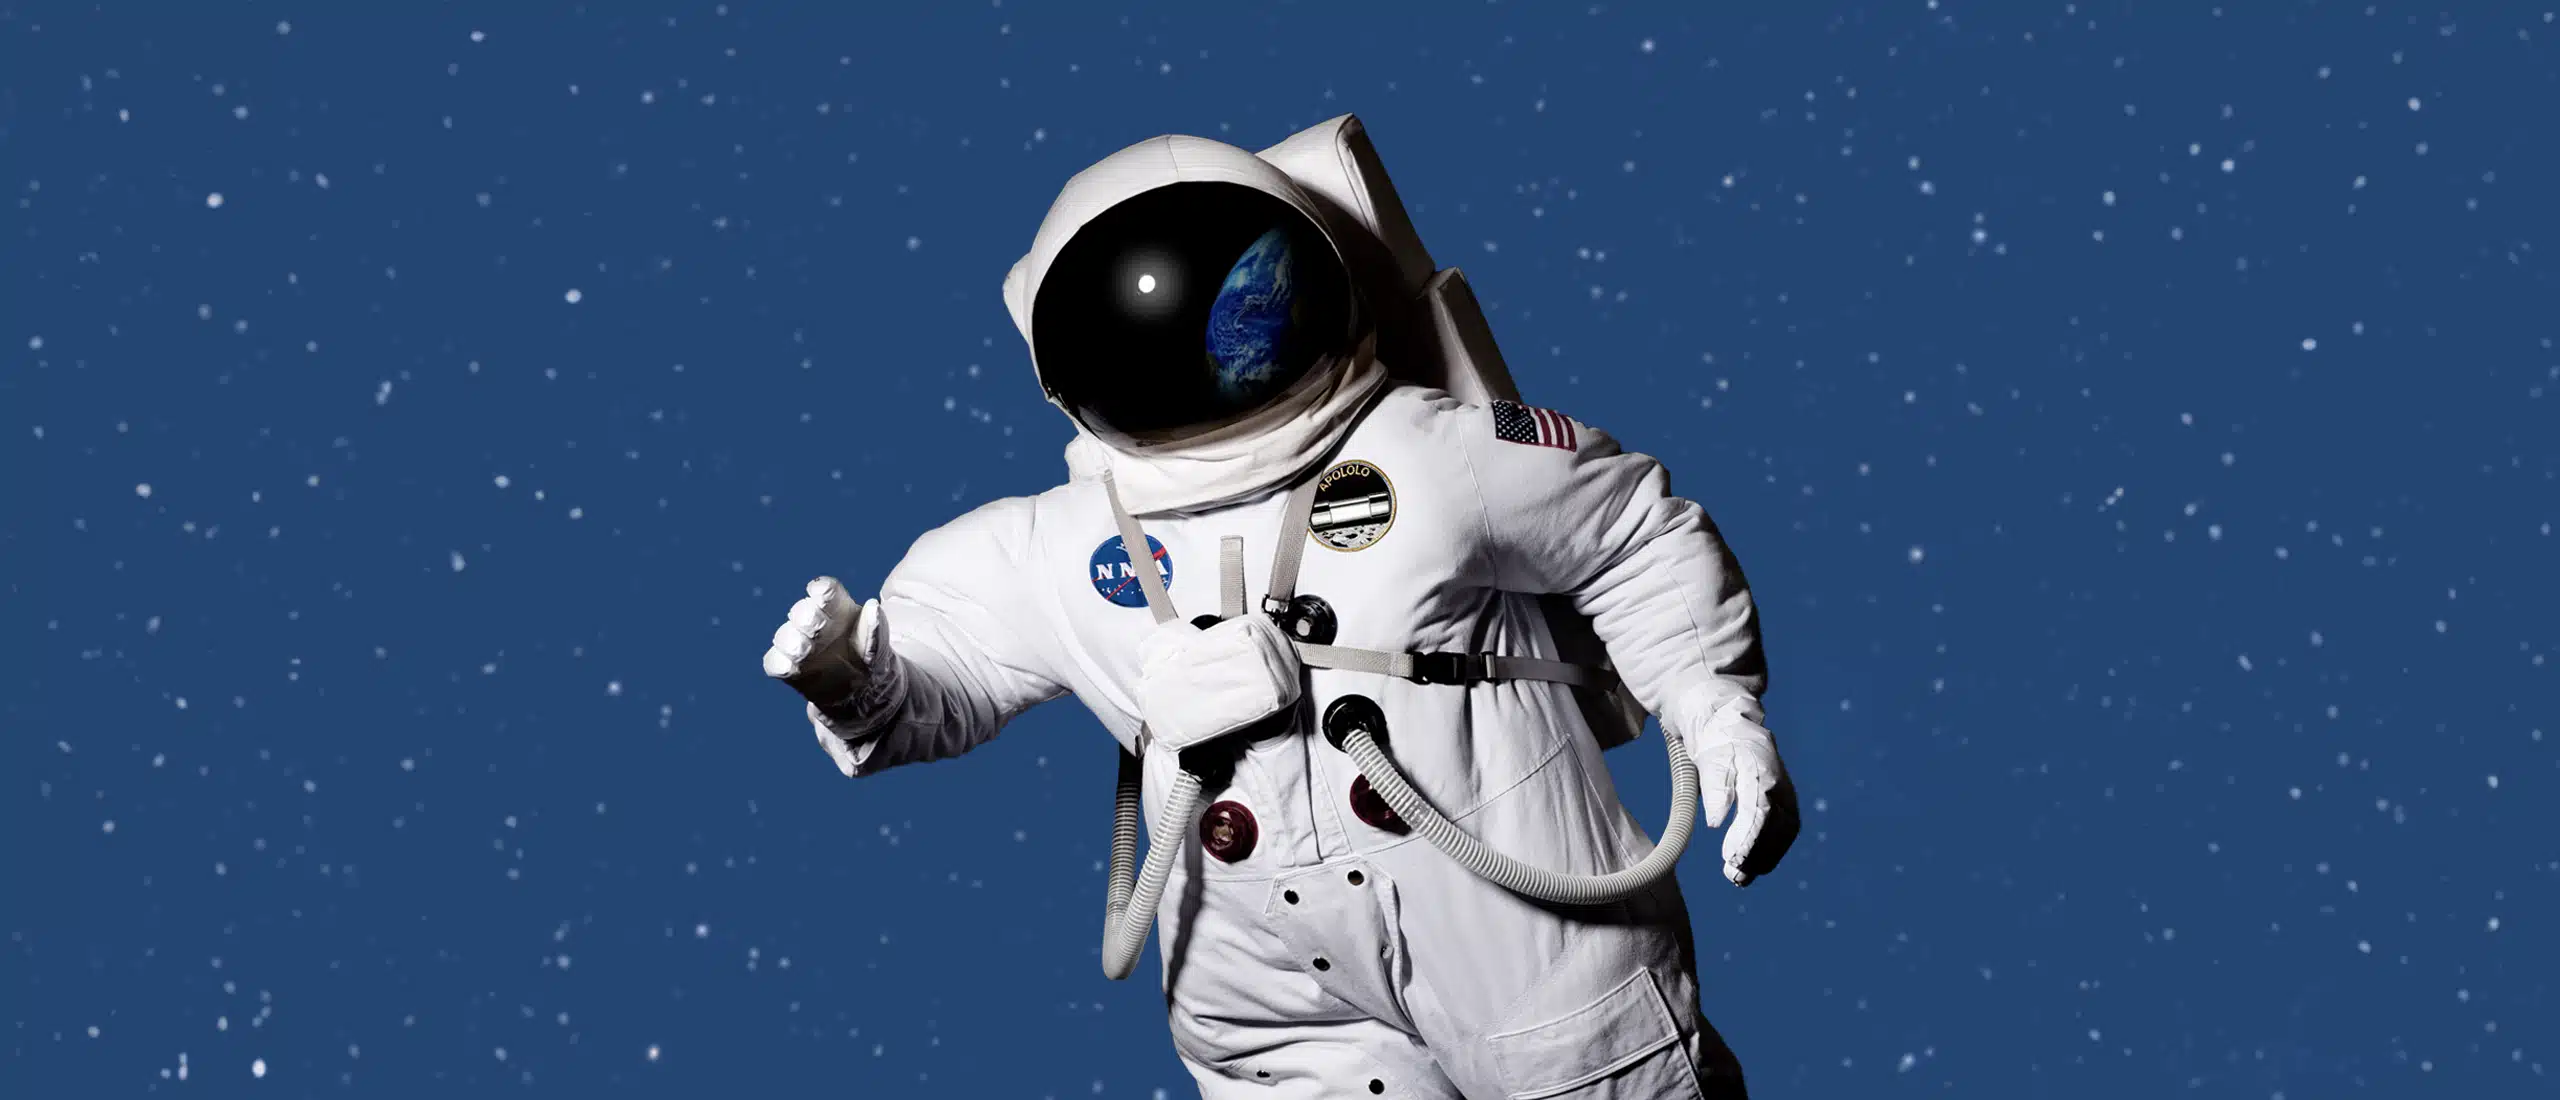 astronaut on a blue background